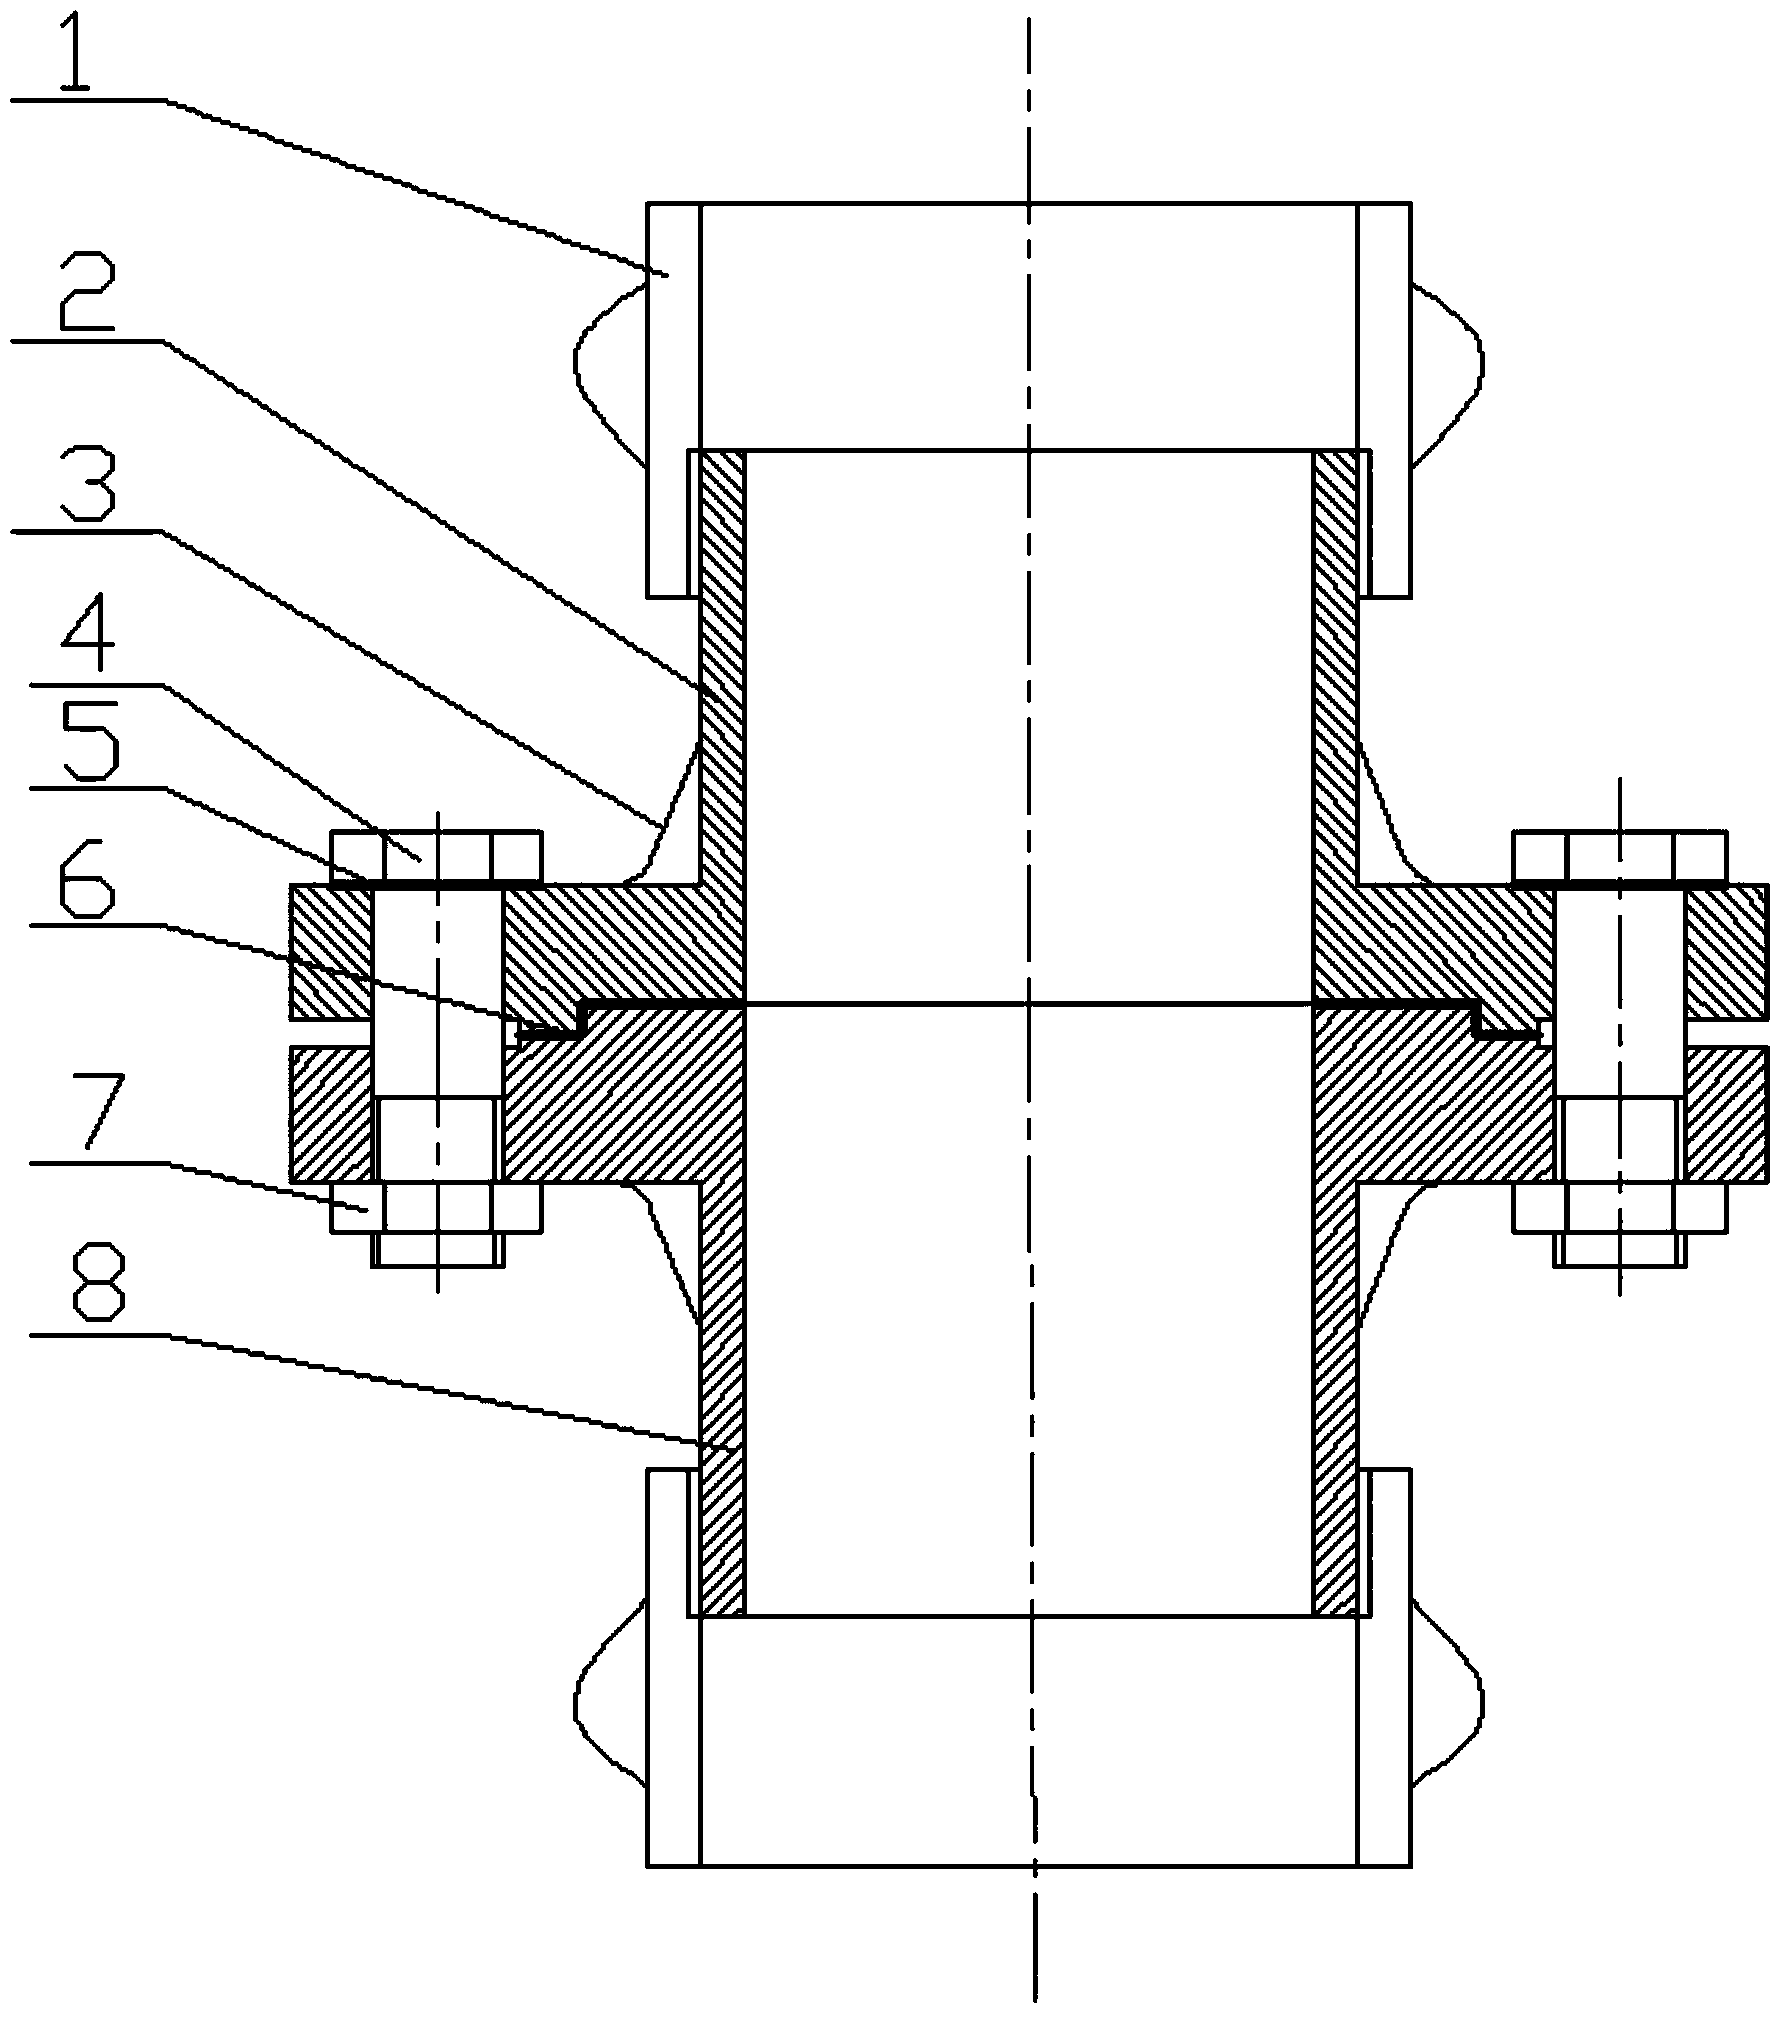 Novel pipeline connecting pressure-resisting flange and application